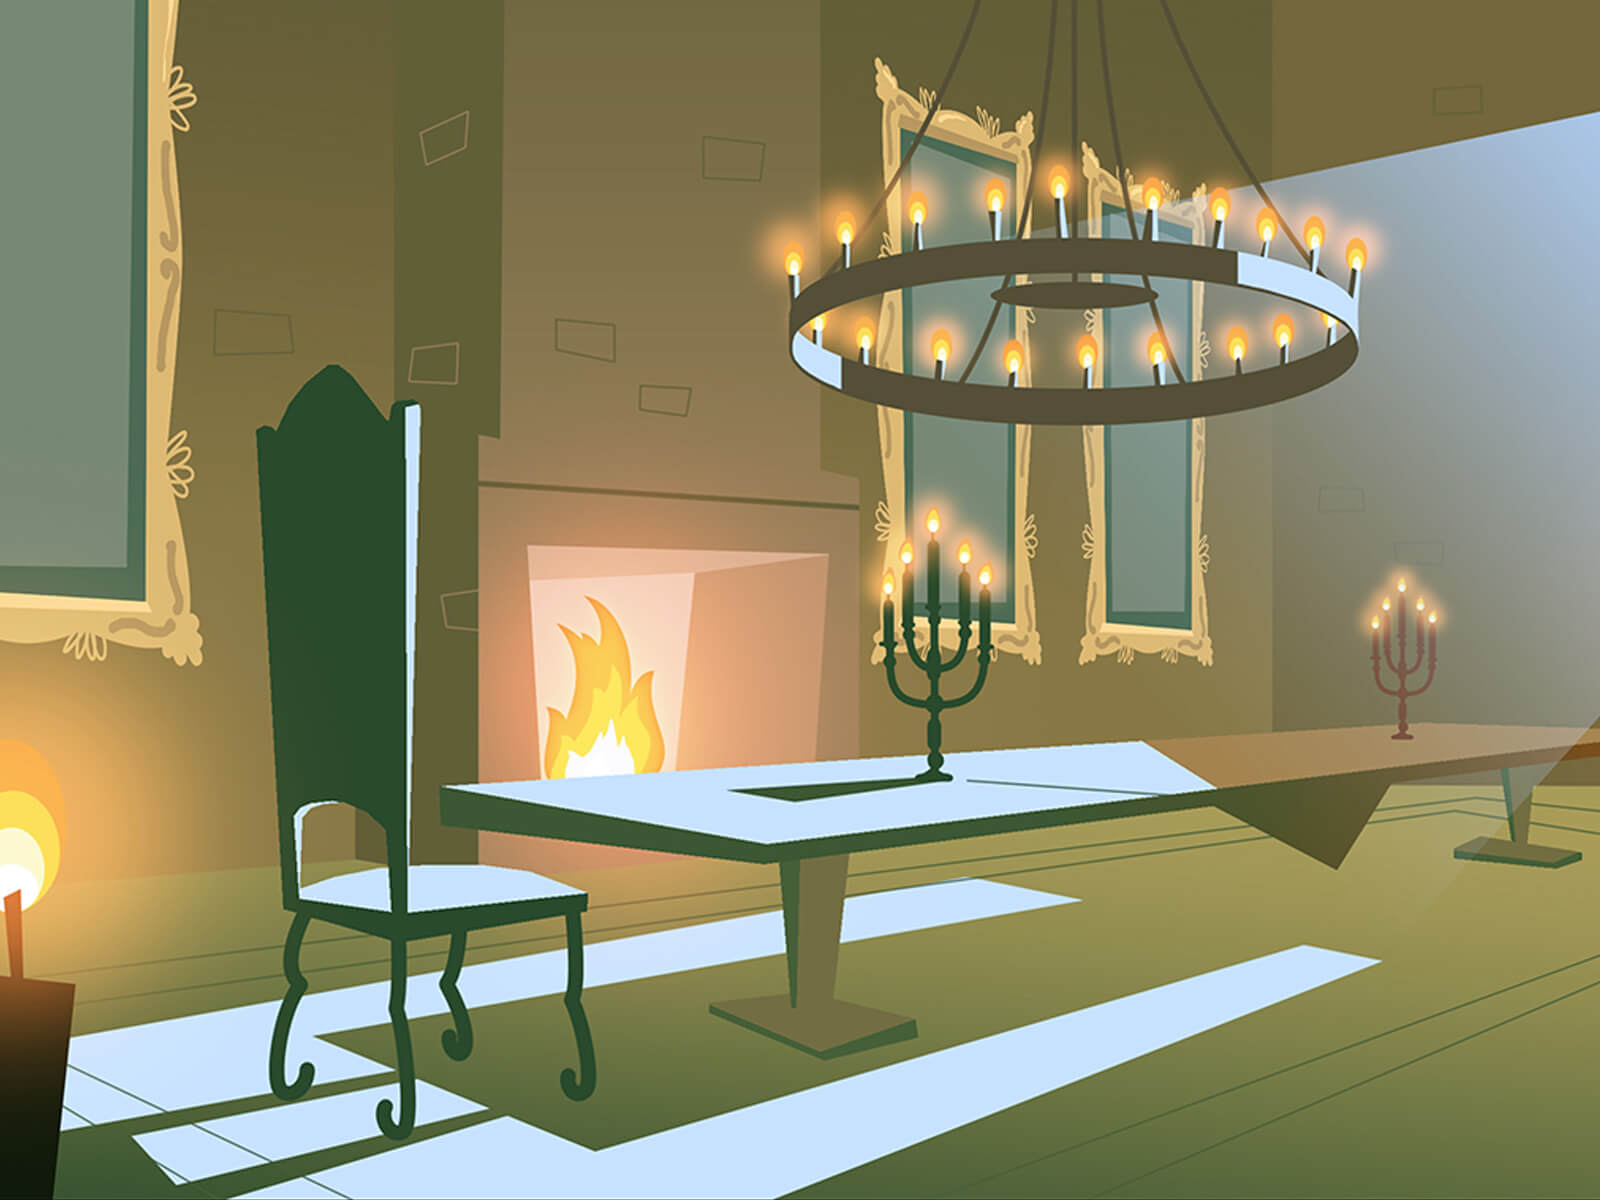 Concept art of a long dining table with high-backed chairs next to a fireplace. A candlelit chandelier glows overhead.